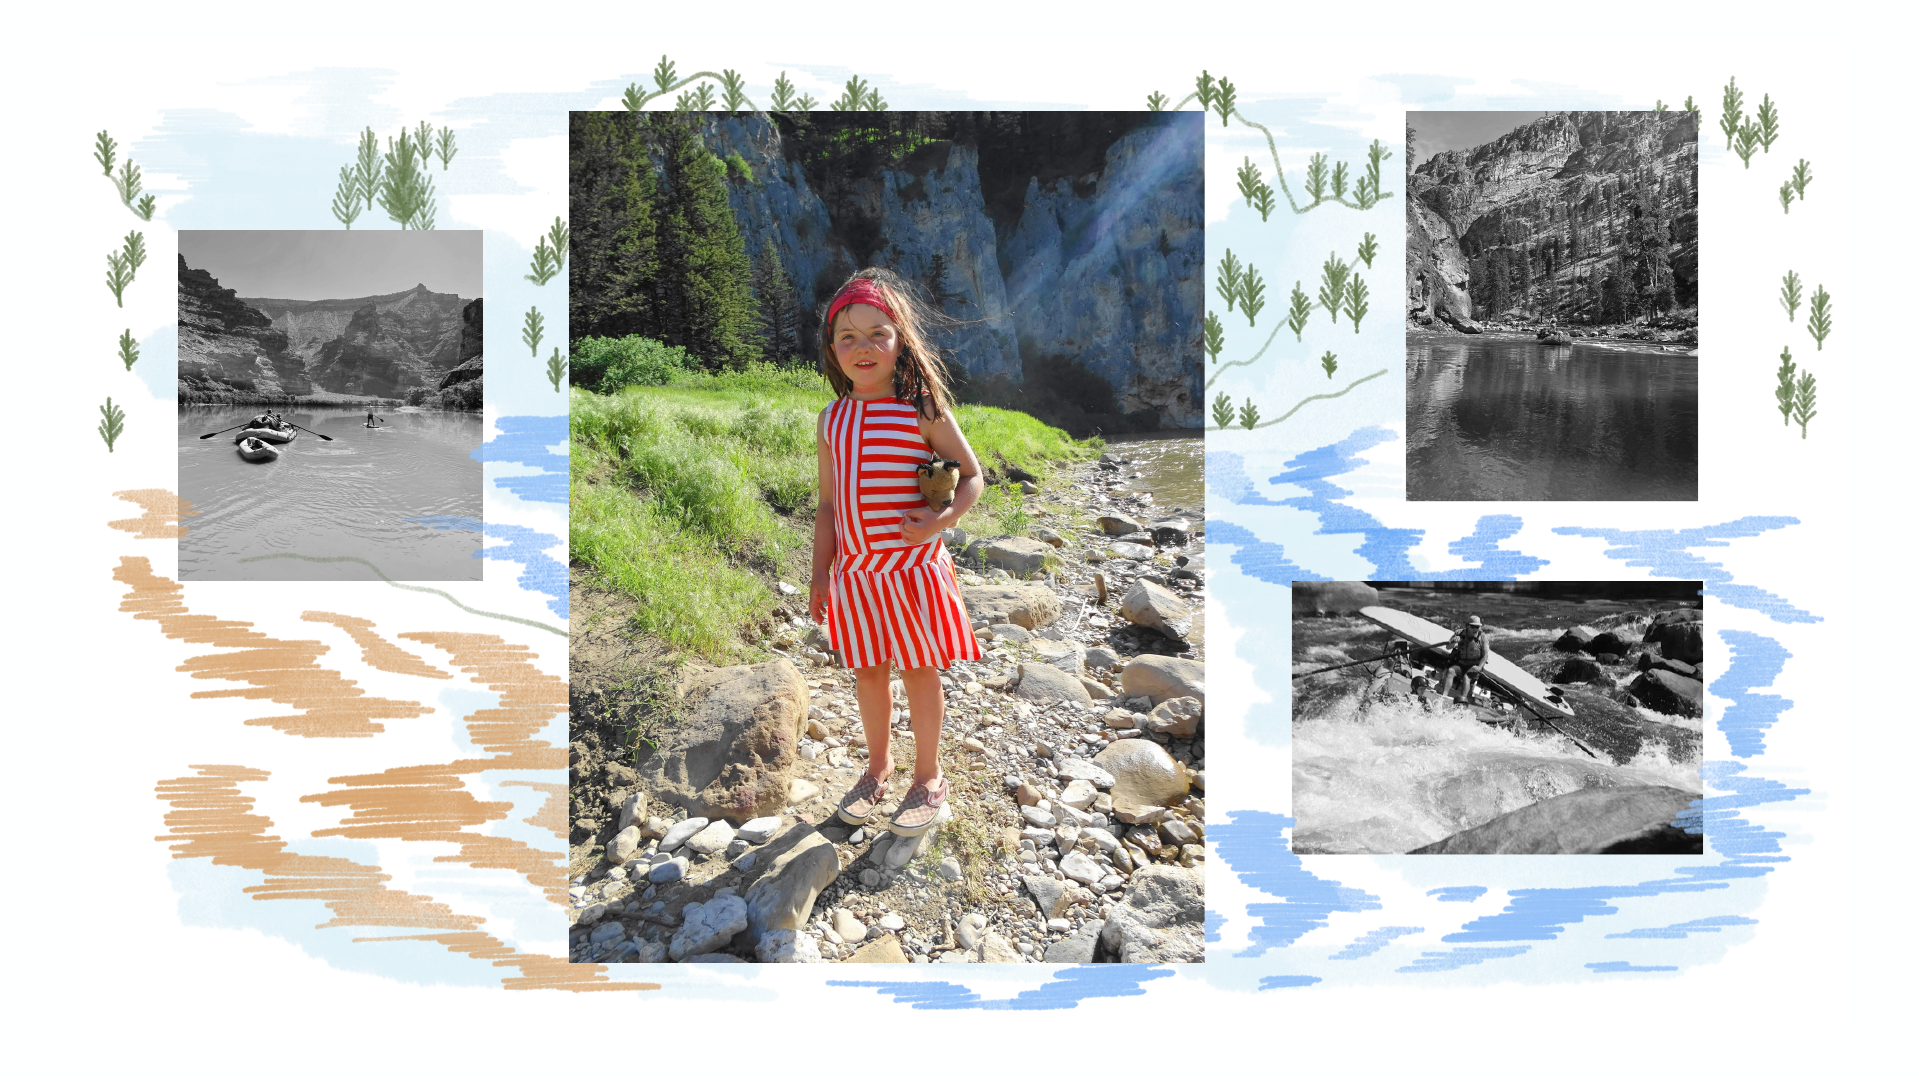 Three photos: (left) rafters floating in a brown river surrounded by arid mountains; (middle) a young girl in a red-and-white striped dress and red headband holds a teddy bar and smiles. She stands on a rocky path surrounded by bright green grass and evergreens; (right) a raft floats in a calm body of water bordered by a large rocky mountain with evergreen trees.